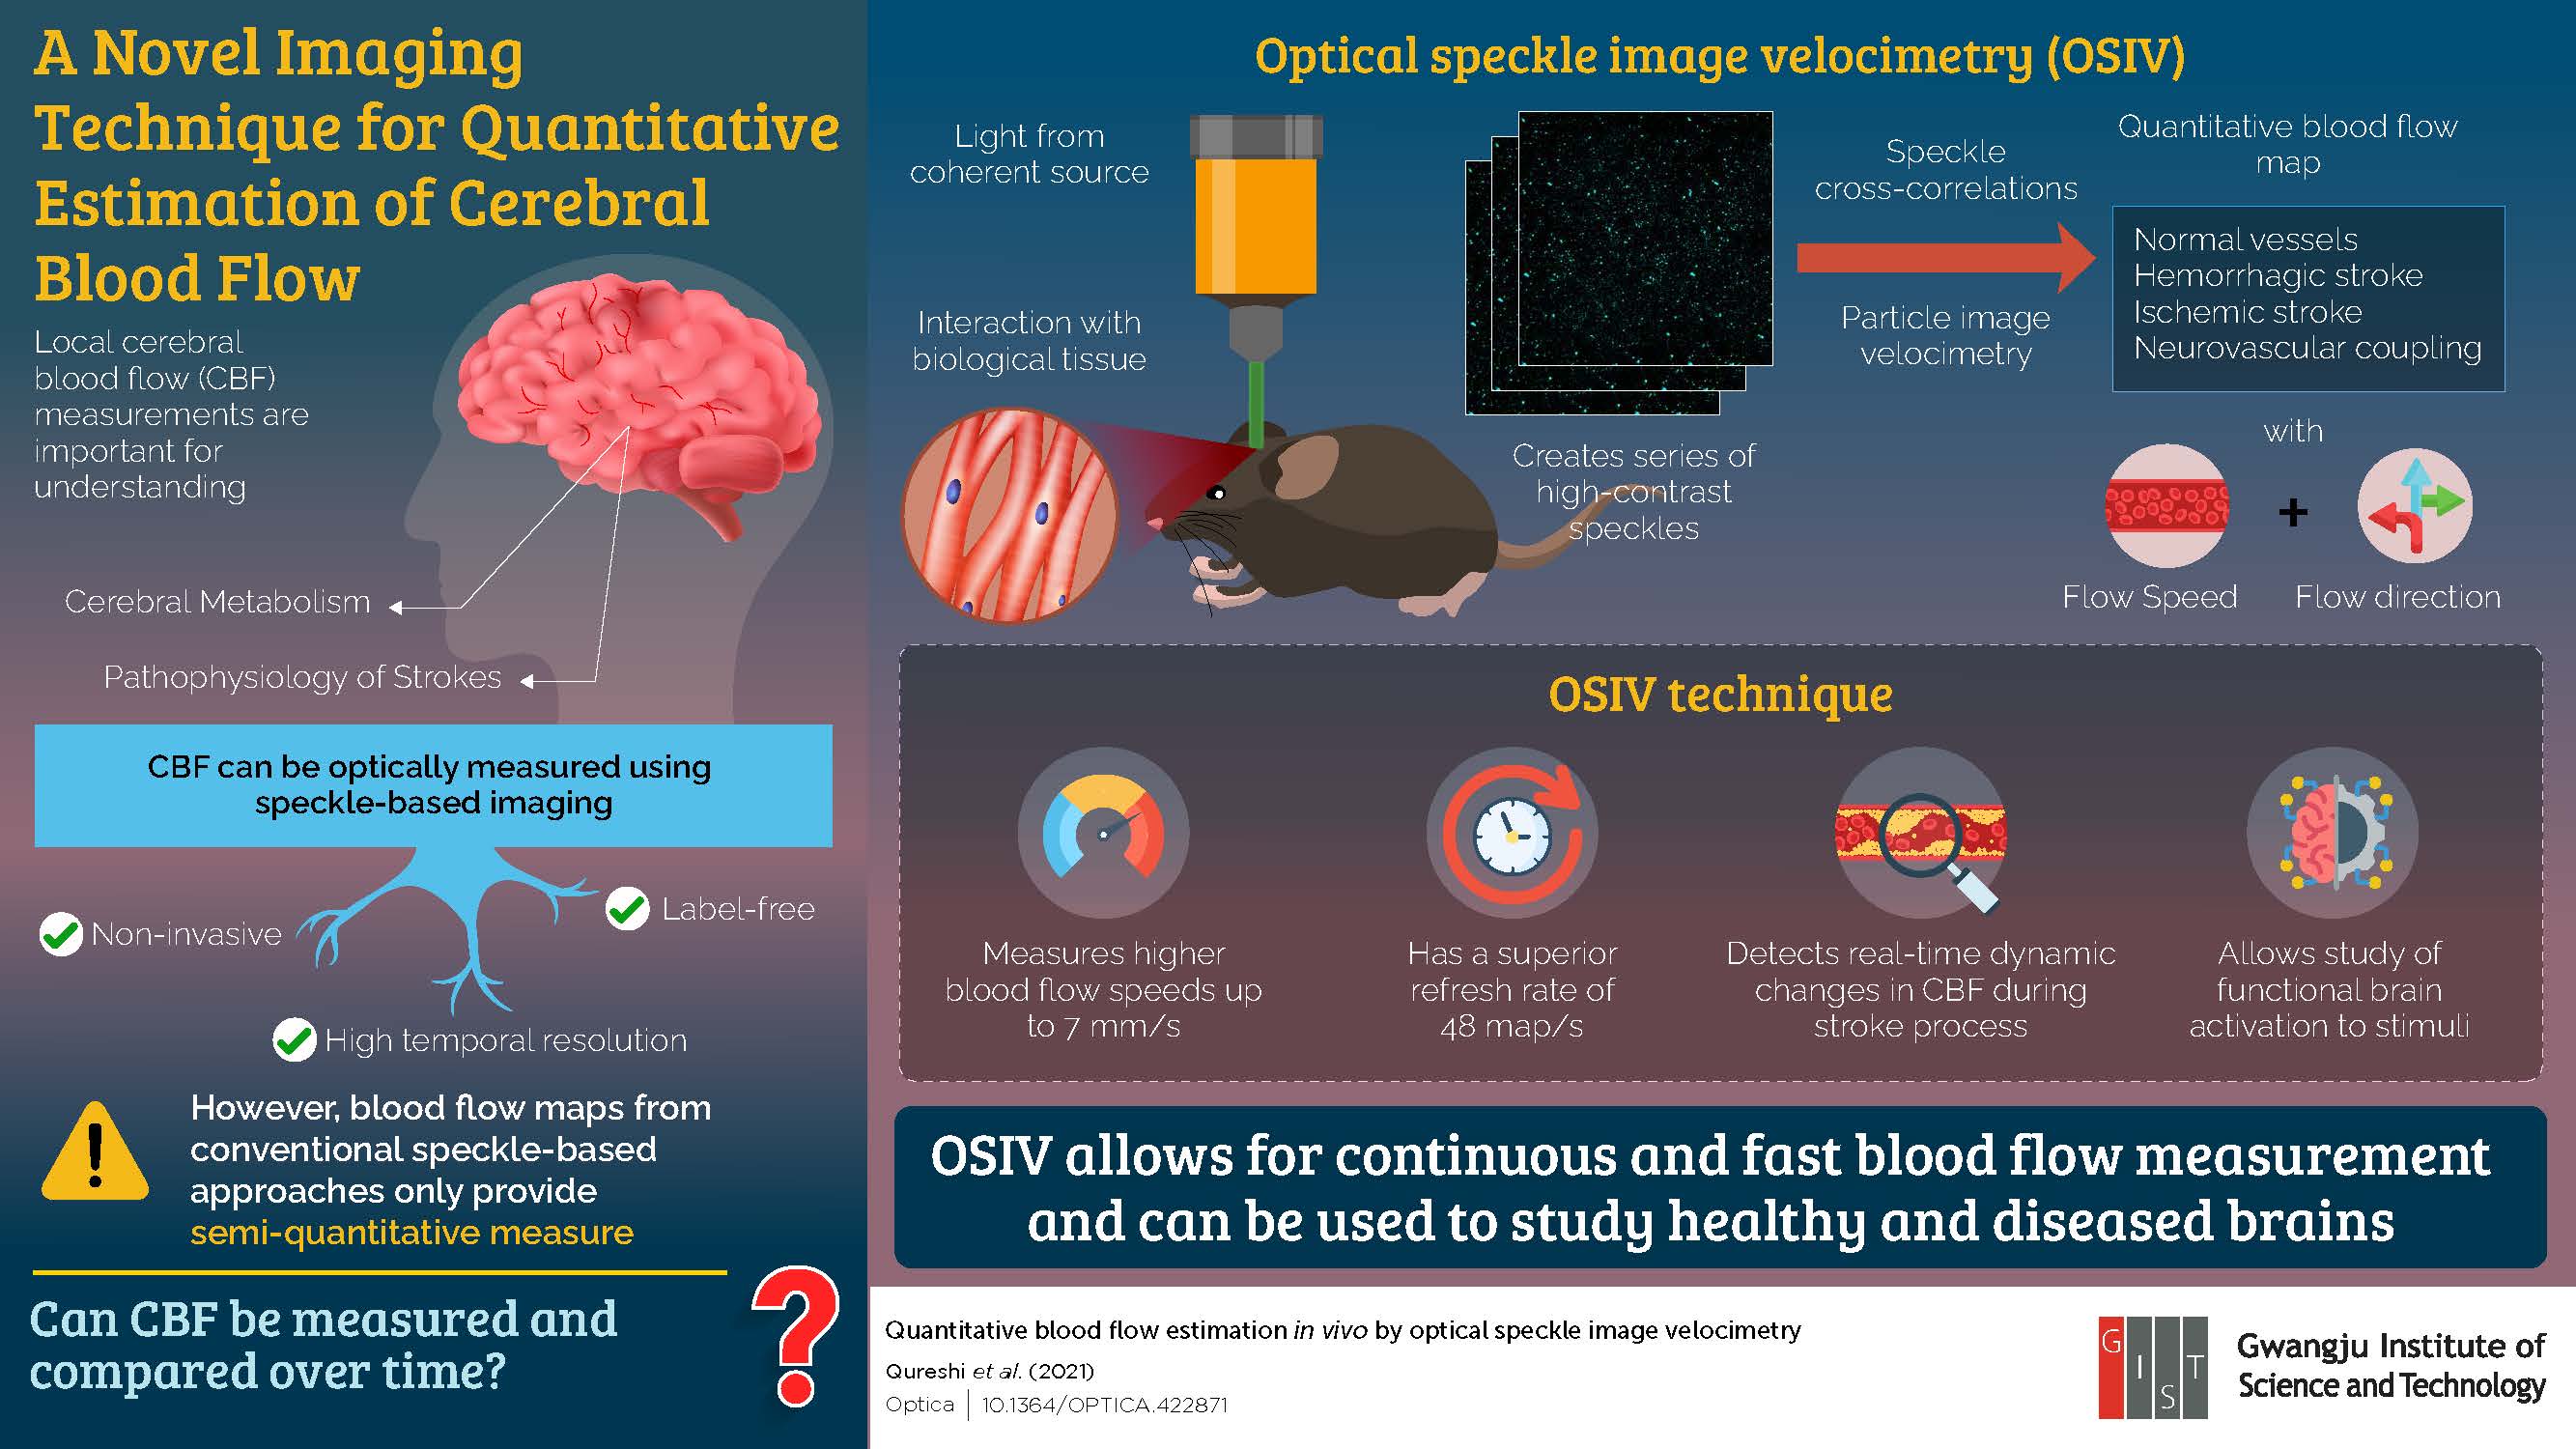 Gwangju Institute of Science and Technology Scientists Shine Light to Measure Blood Flow in the Brain in Real Time 이미지